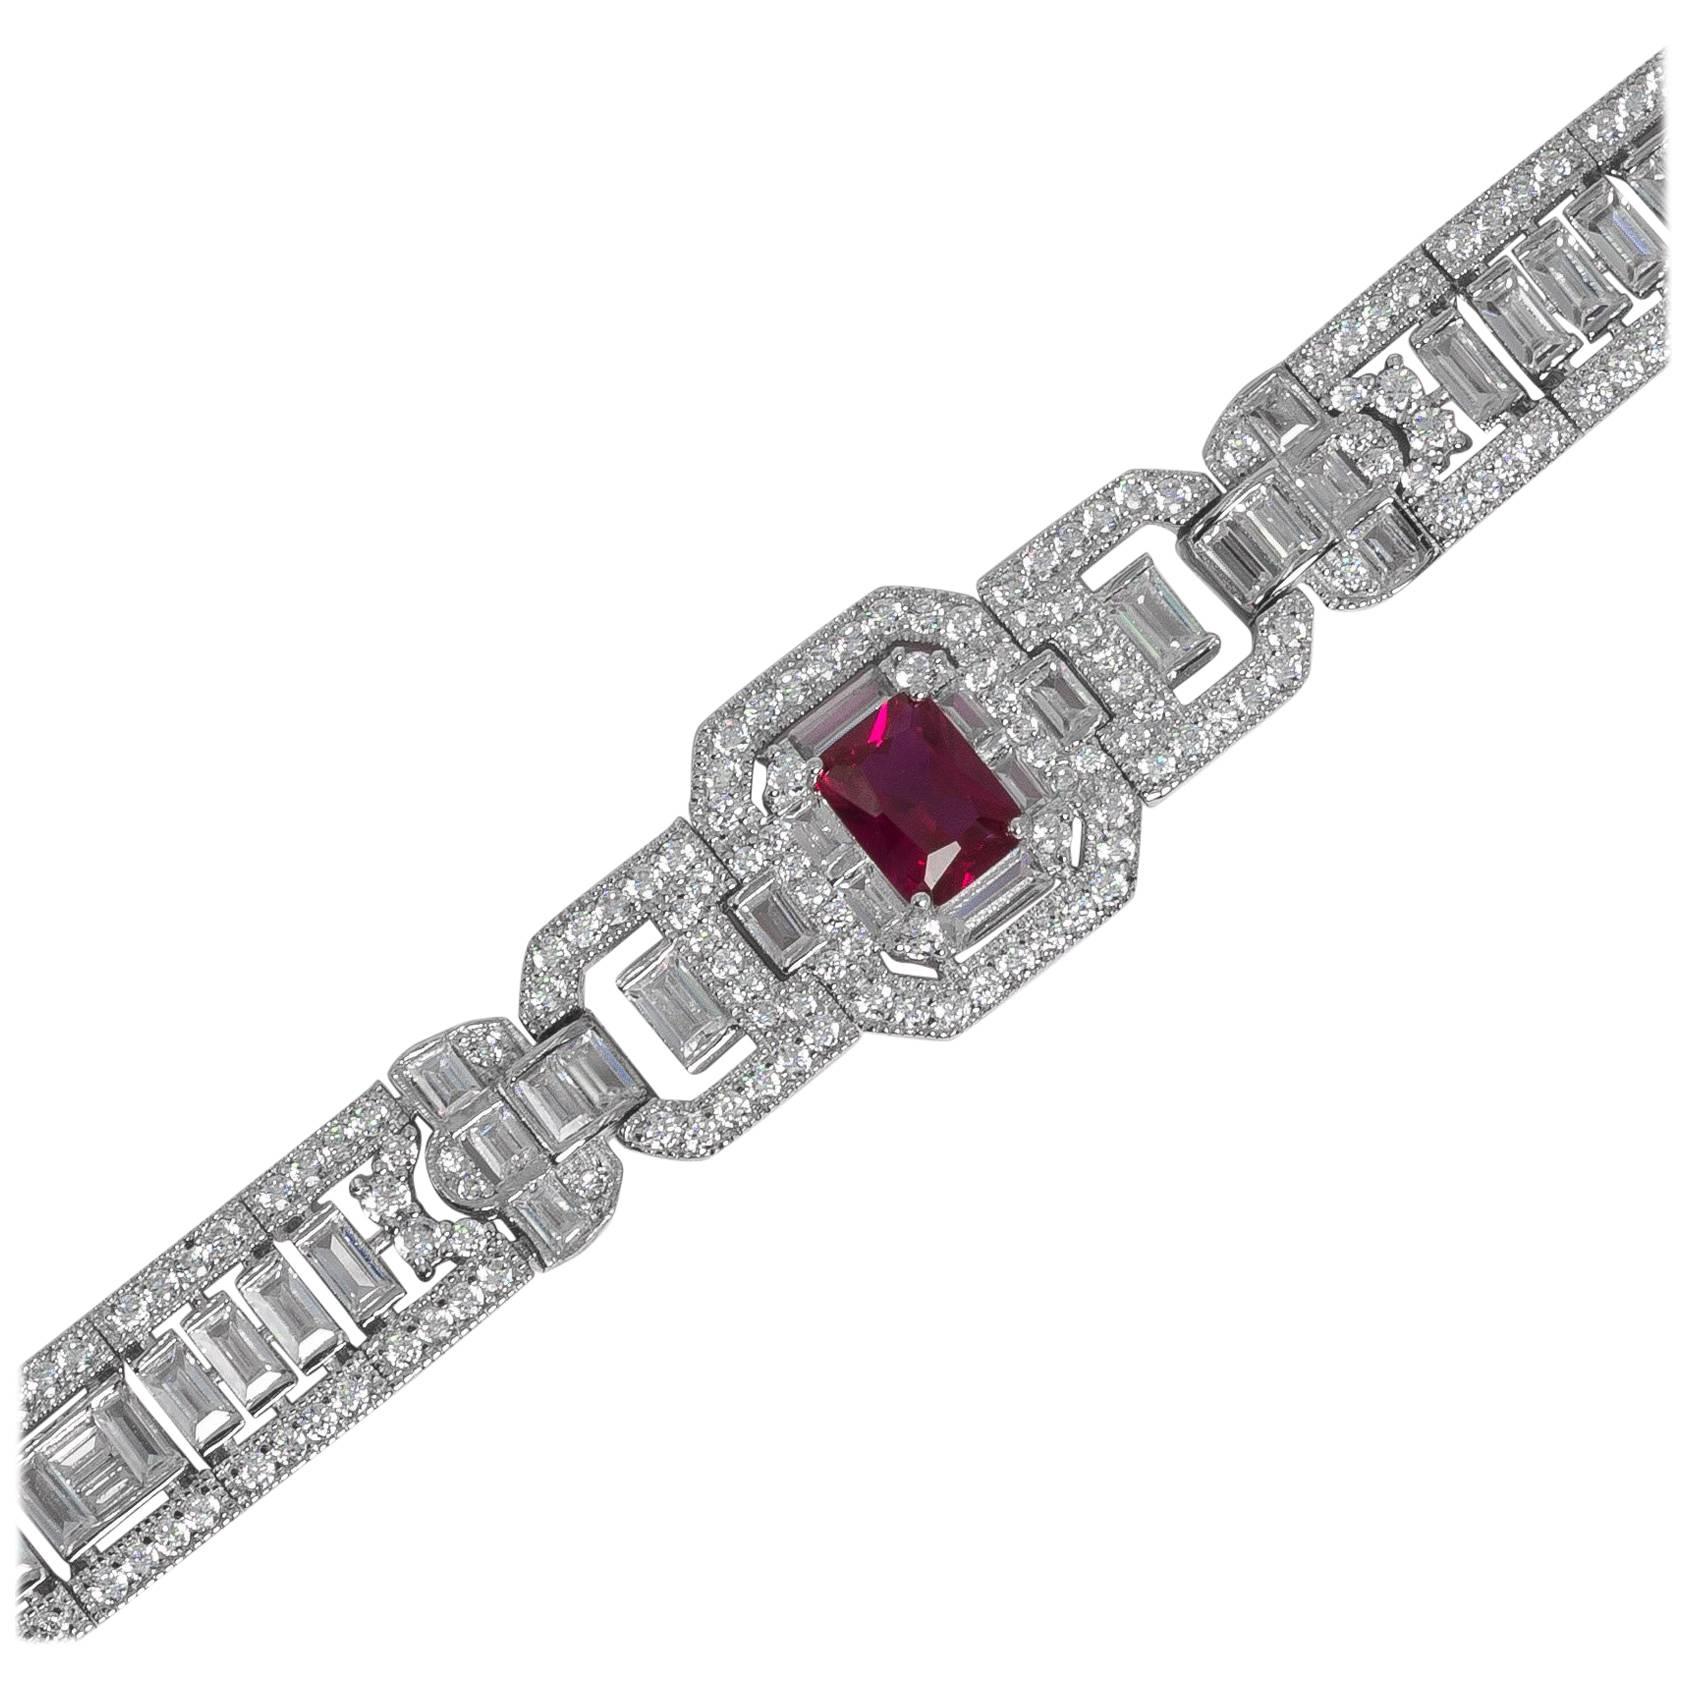 Art Deco style diamond ruby costume jewelry  bracelet hand made and hand cut cubic zirconia hand set in non  tarnish rhodium sterling silver. Baguettes running through the center edged with round stones all flexible center set art deco motif with 3